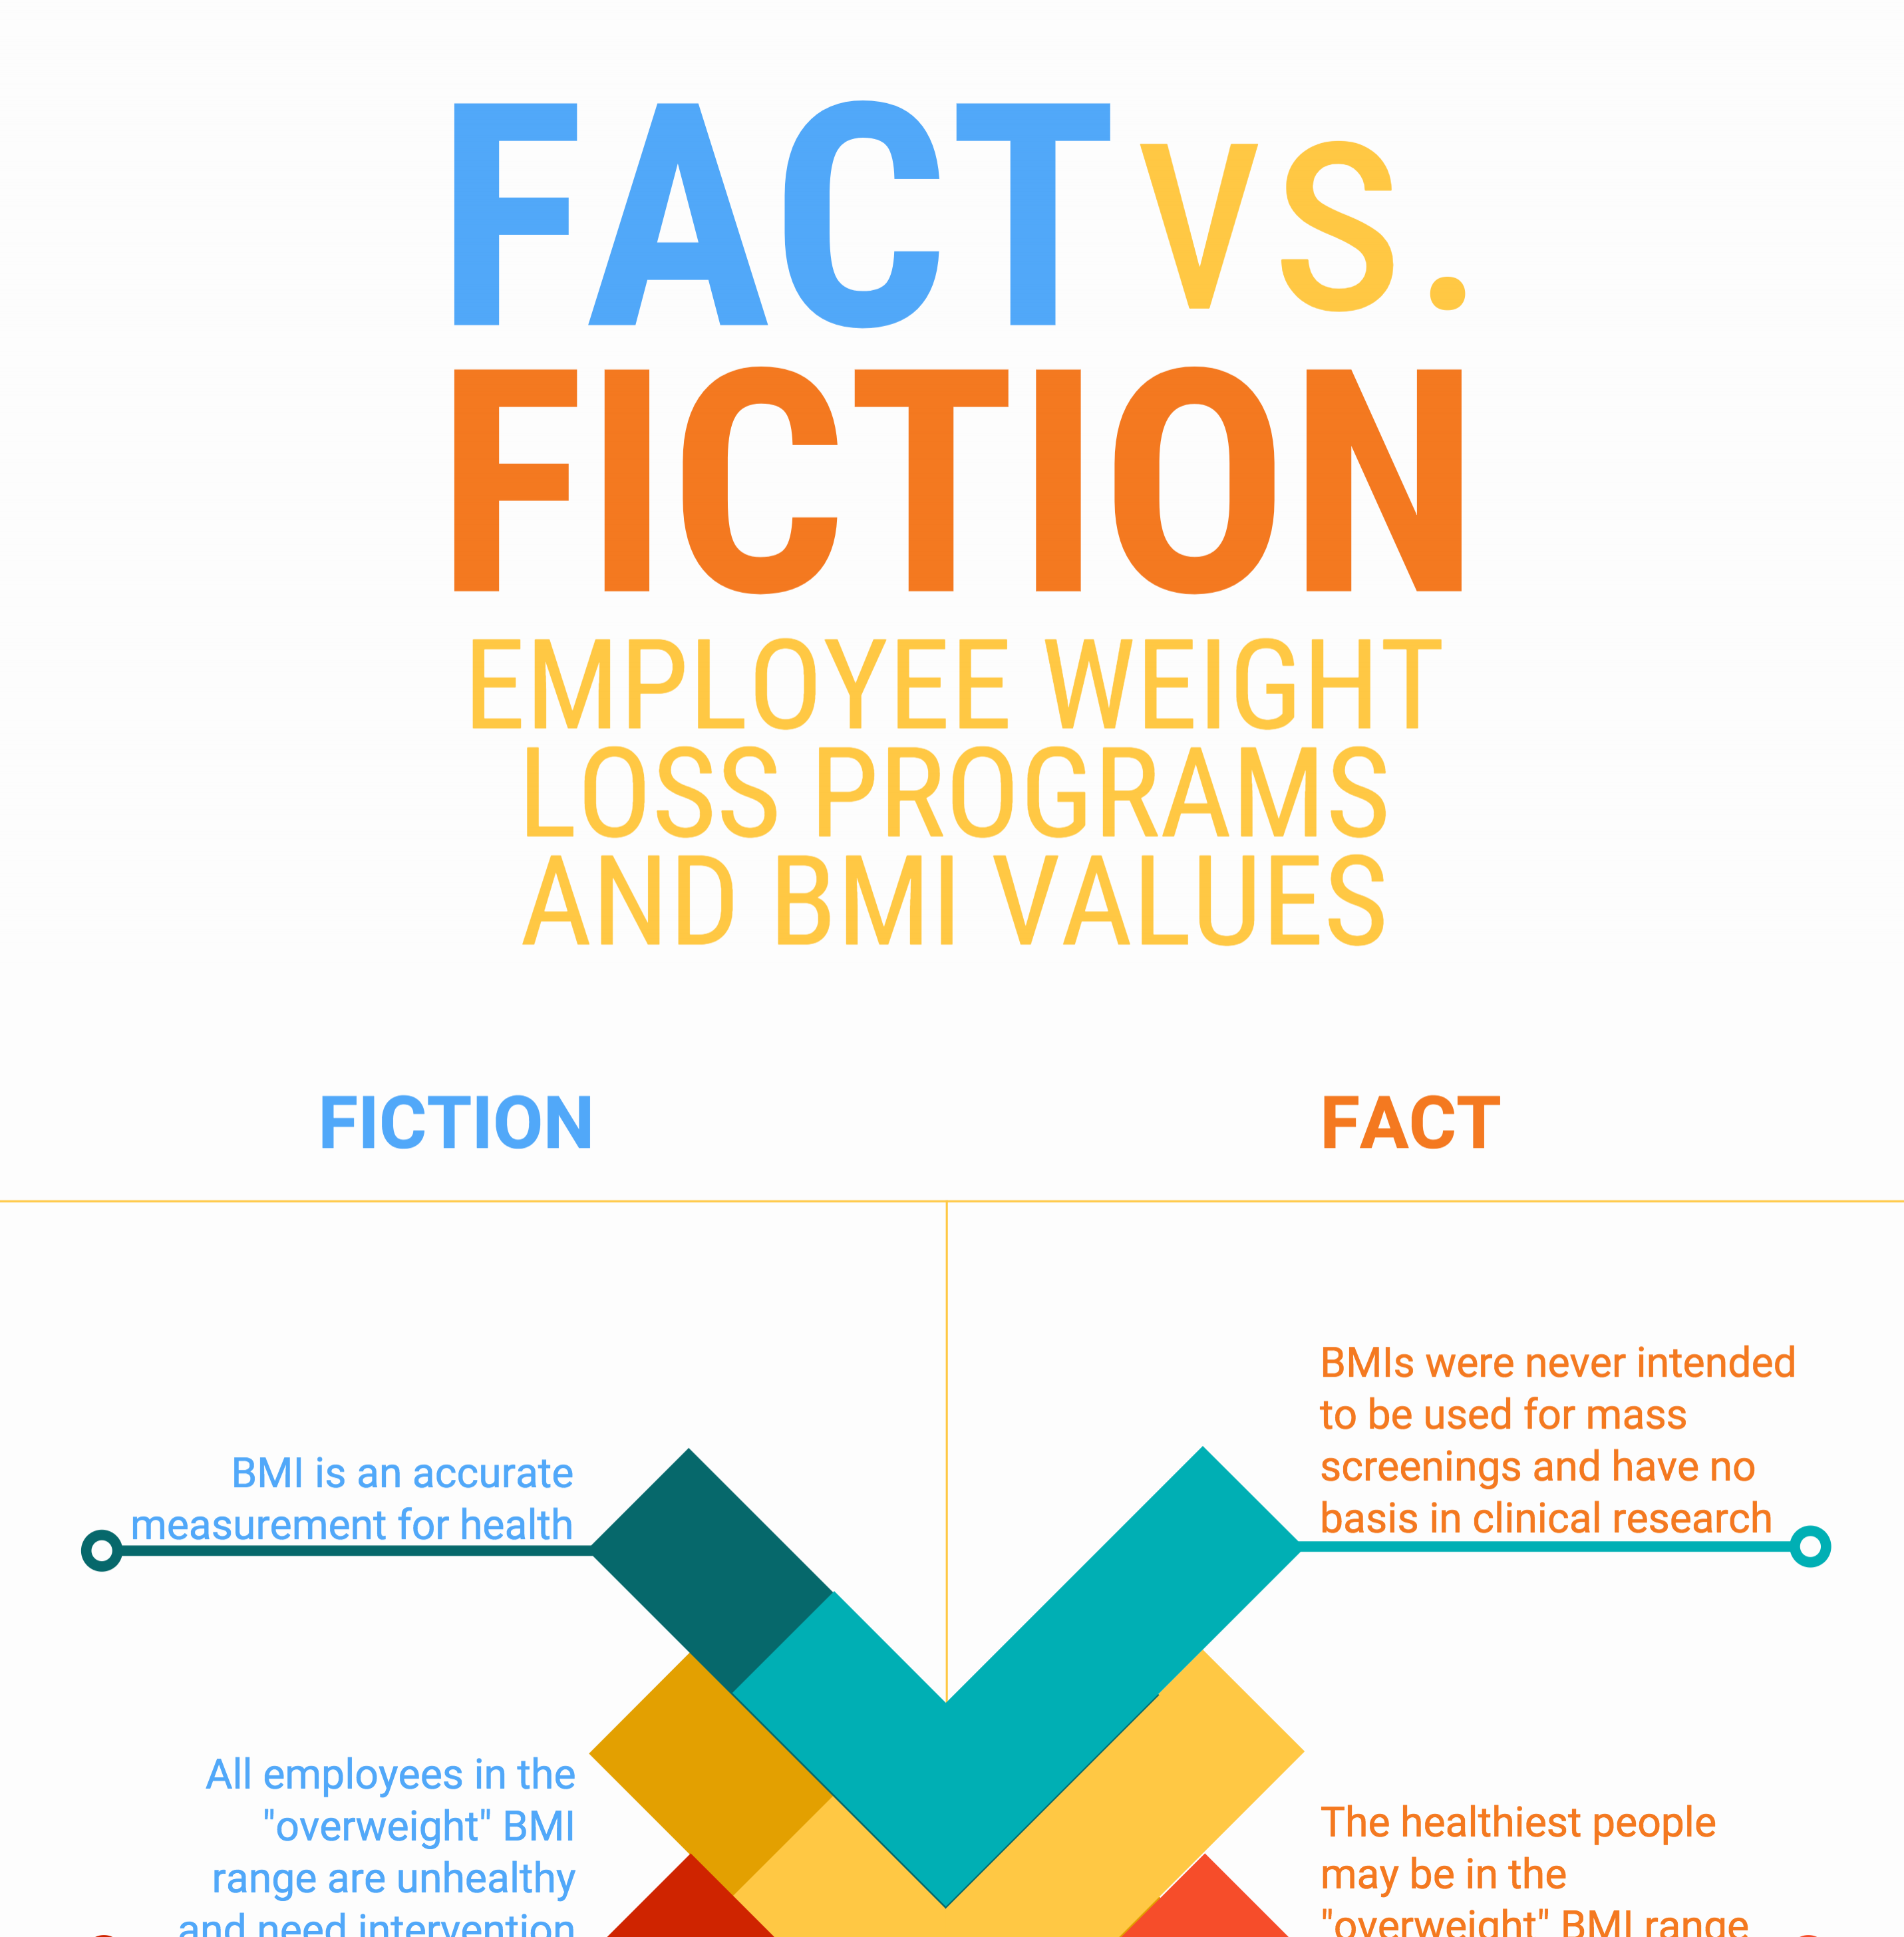 Facts vs. Fiction: Employee Weight Loss Programs and BMI Values